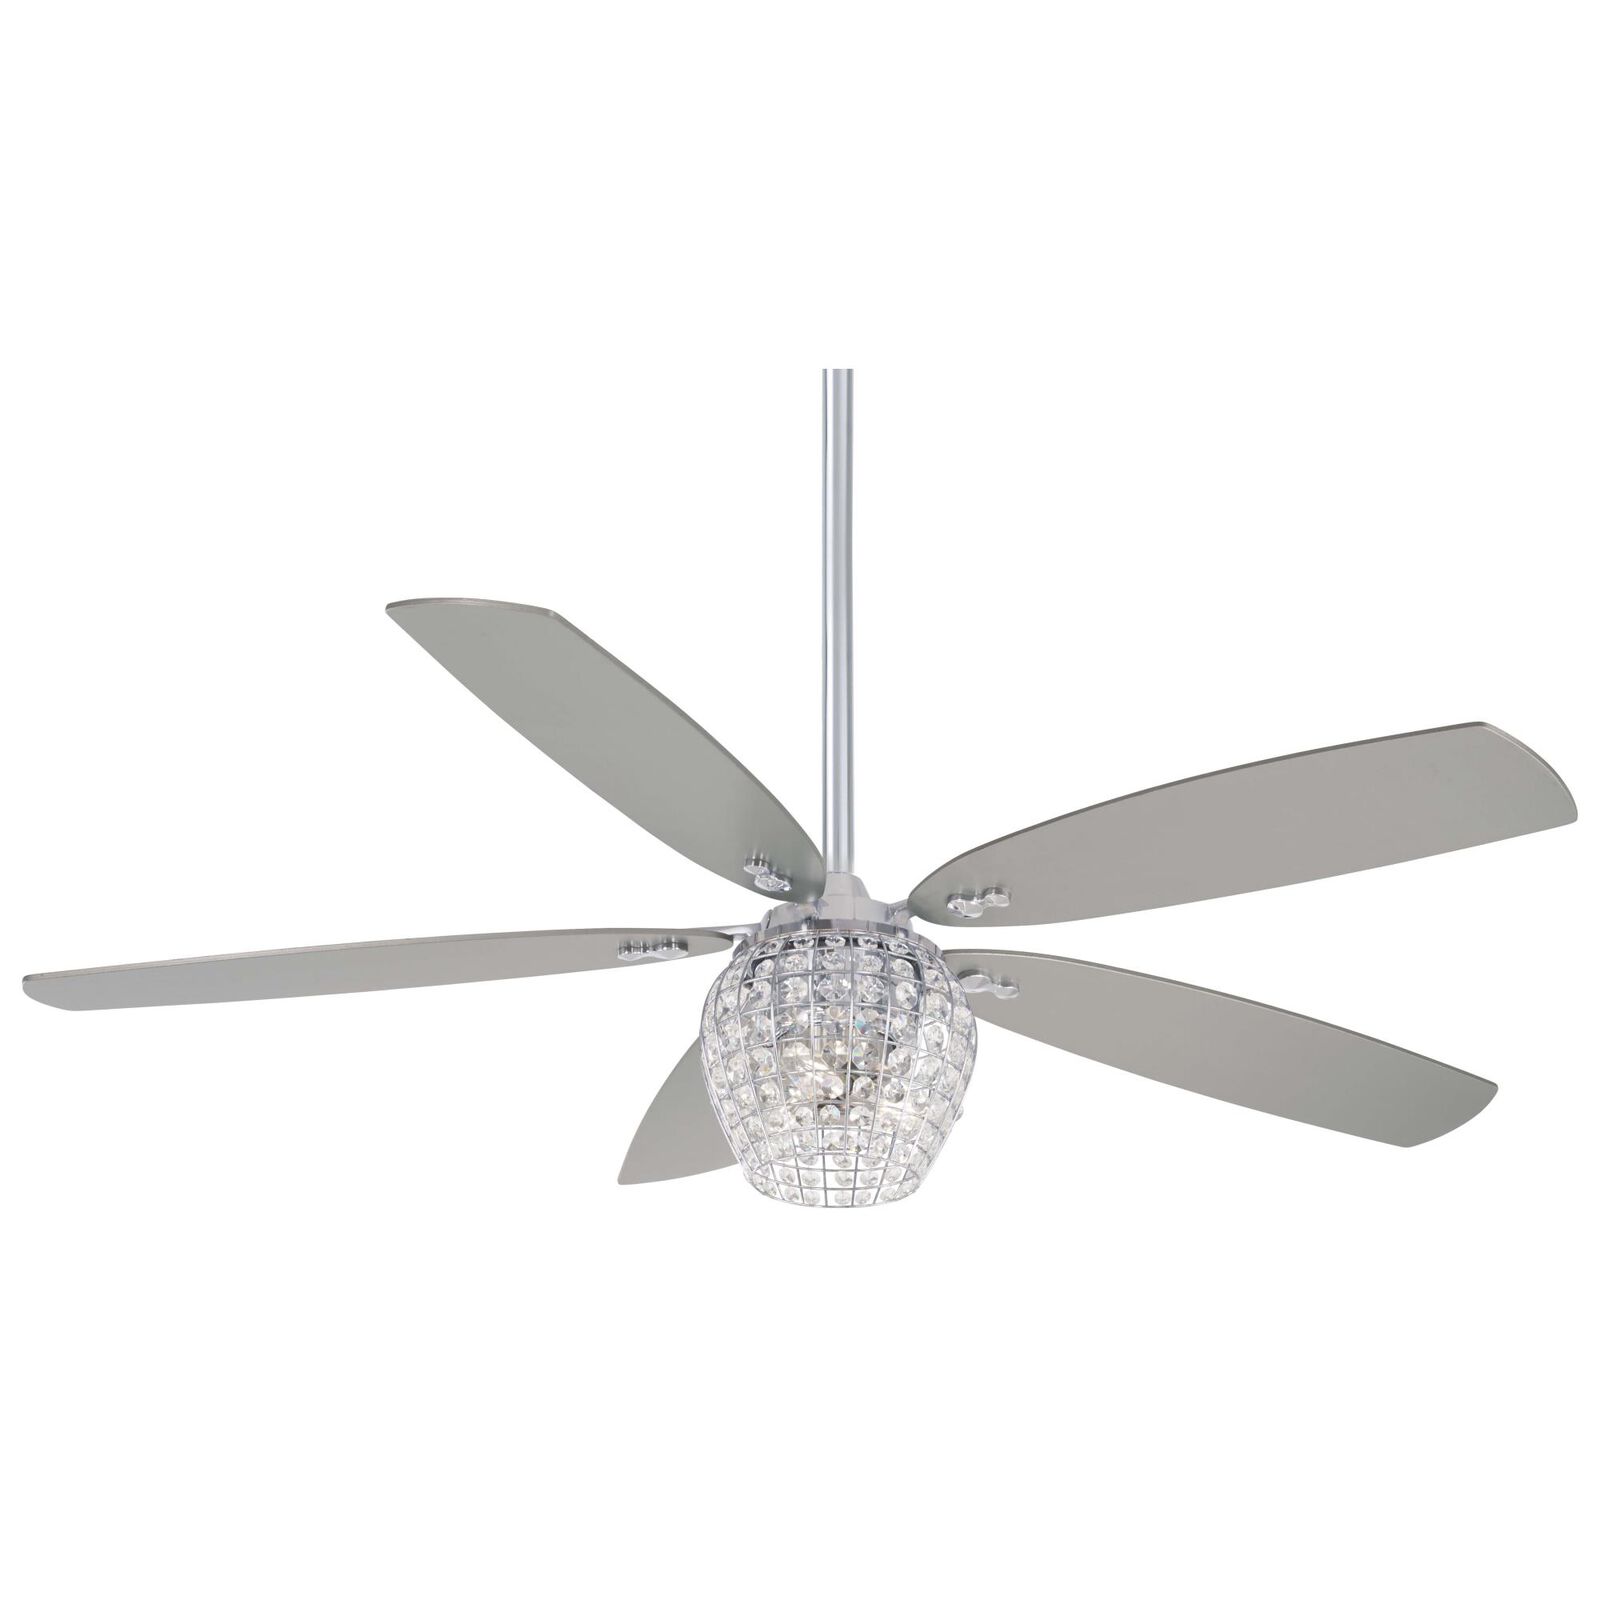 Bling 56 Inch Ceiling Fan With Light Kit By Minka Aire